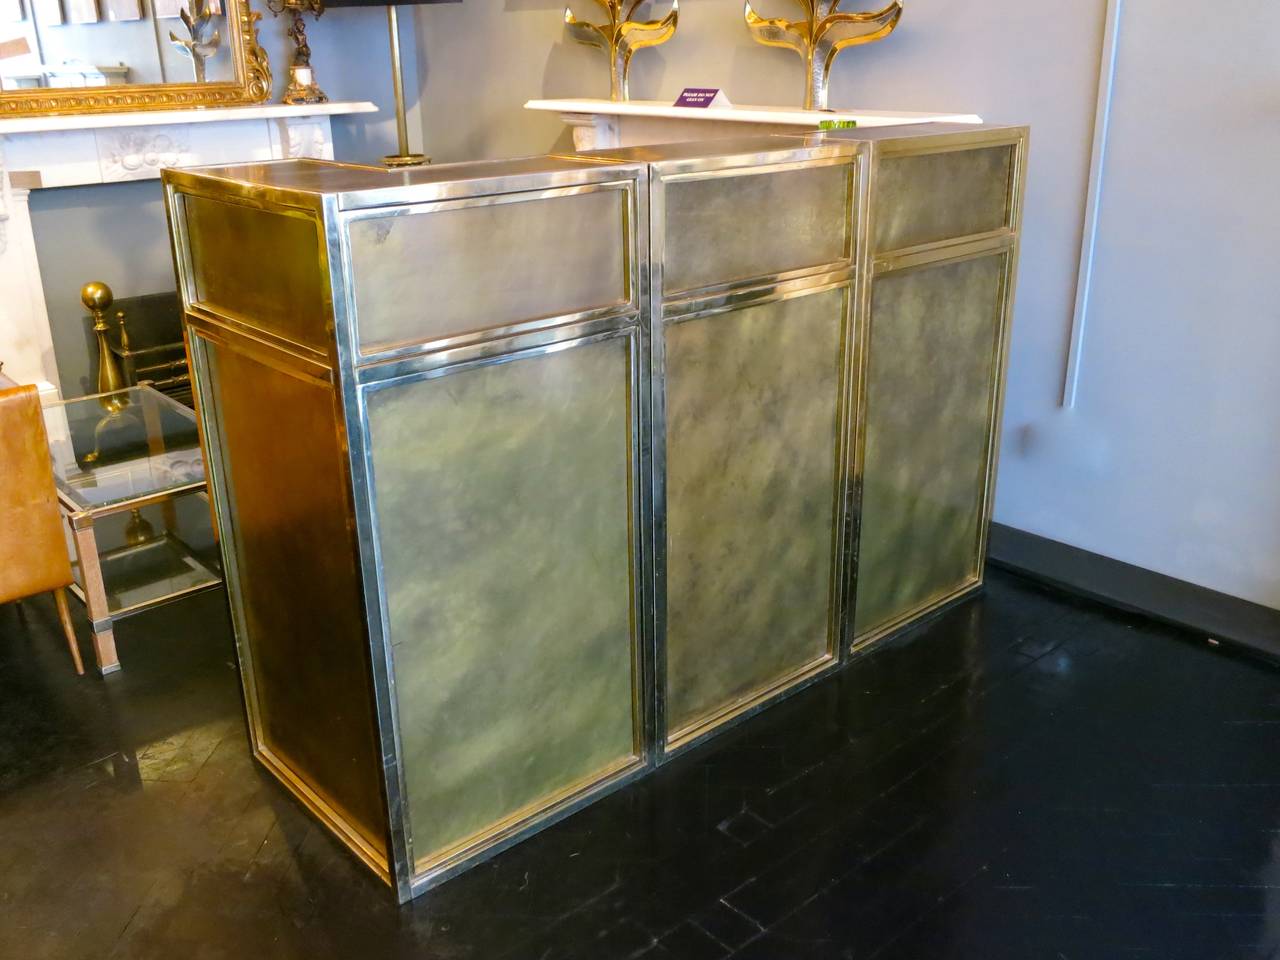 A three piece bar which can be configured into several shapes, with gold lacquered edging around distressed bronze brass coloured panels. The rear of the bar with plenty of storage and removable shelving. Each pieces dimensions are 120cm high x 60cm